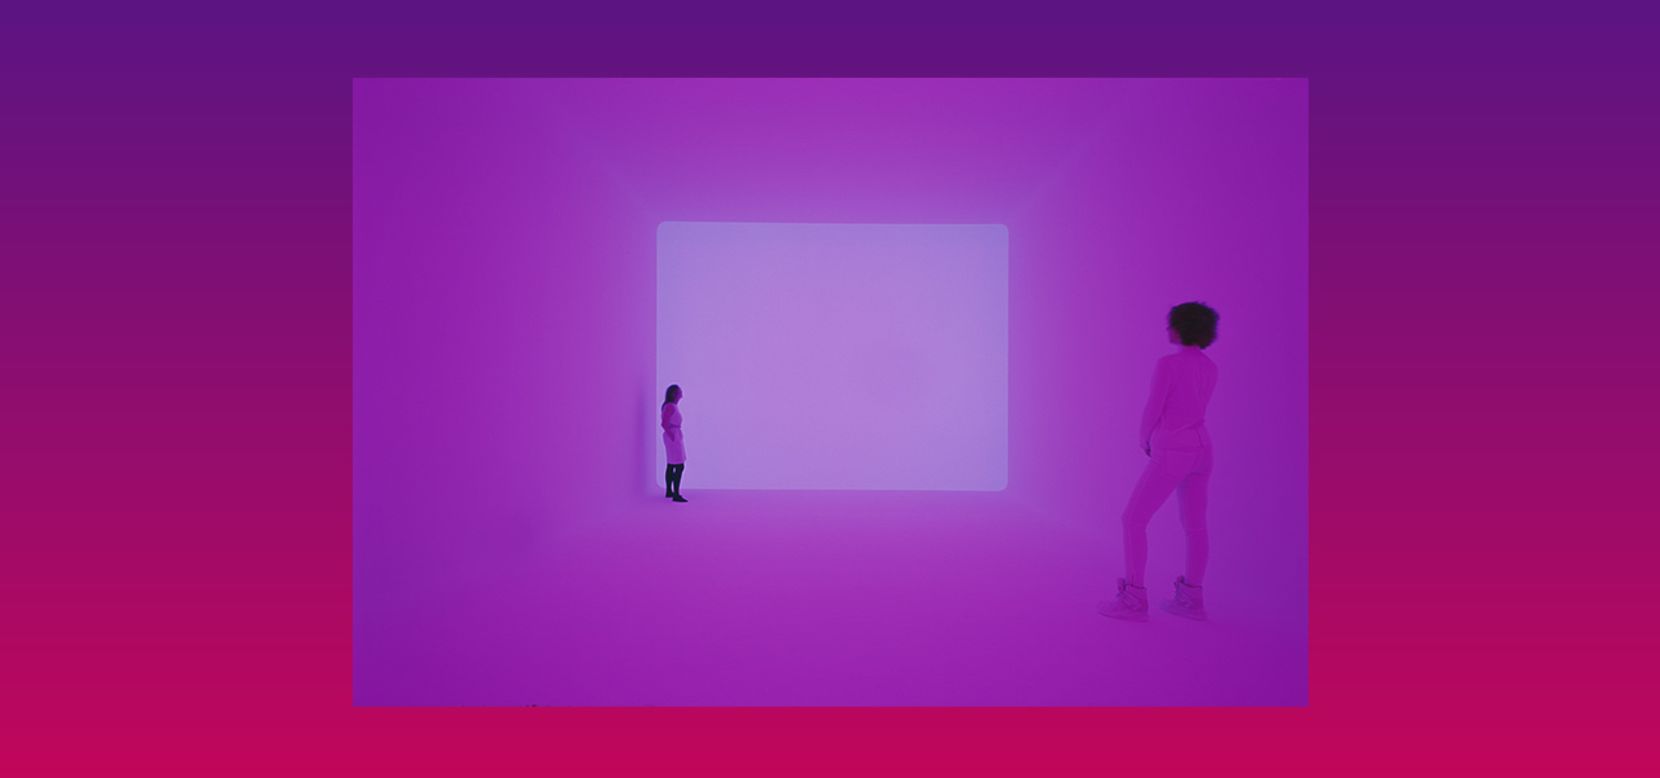 "James Turrell: A Retrospective" explores the American artist's work over almost 50 years, bringing together projection pieces, built spaces, holograms, drawings, prints and photographs. According to the National Gallery of Australia, Turrell encouraged the gallery to allow visitors to experience his works while  naked. 